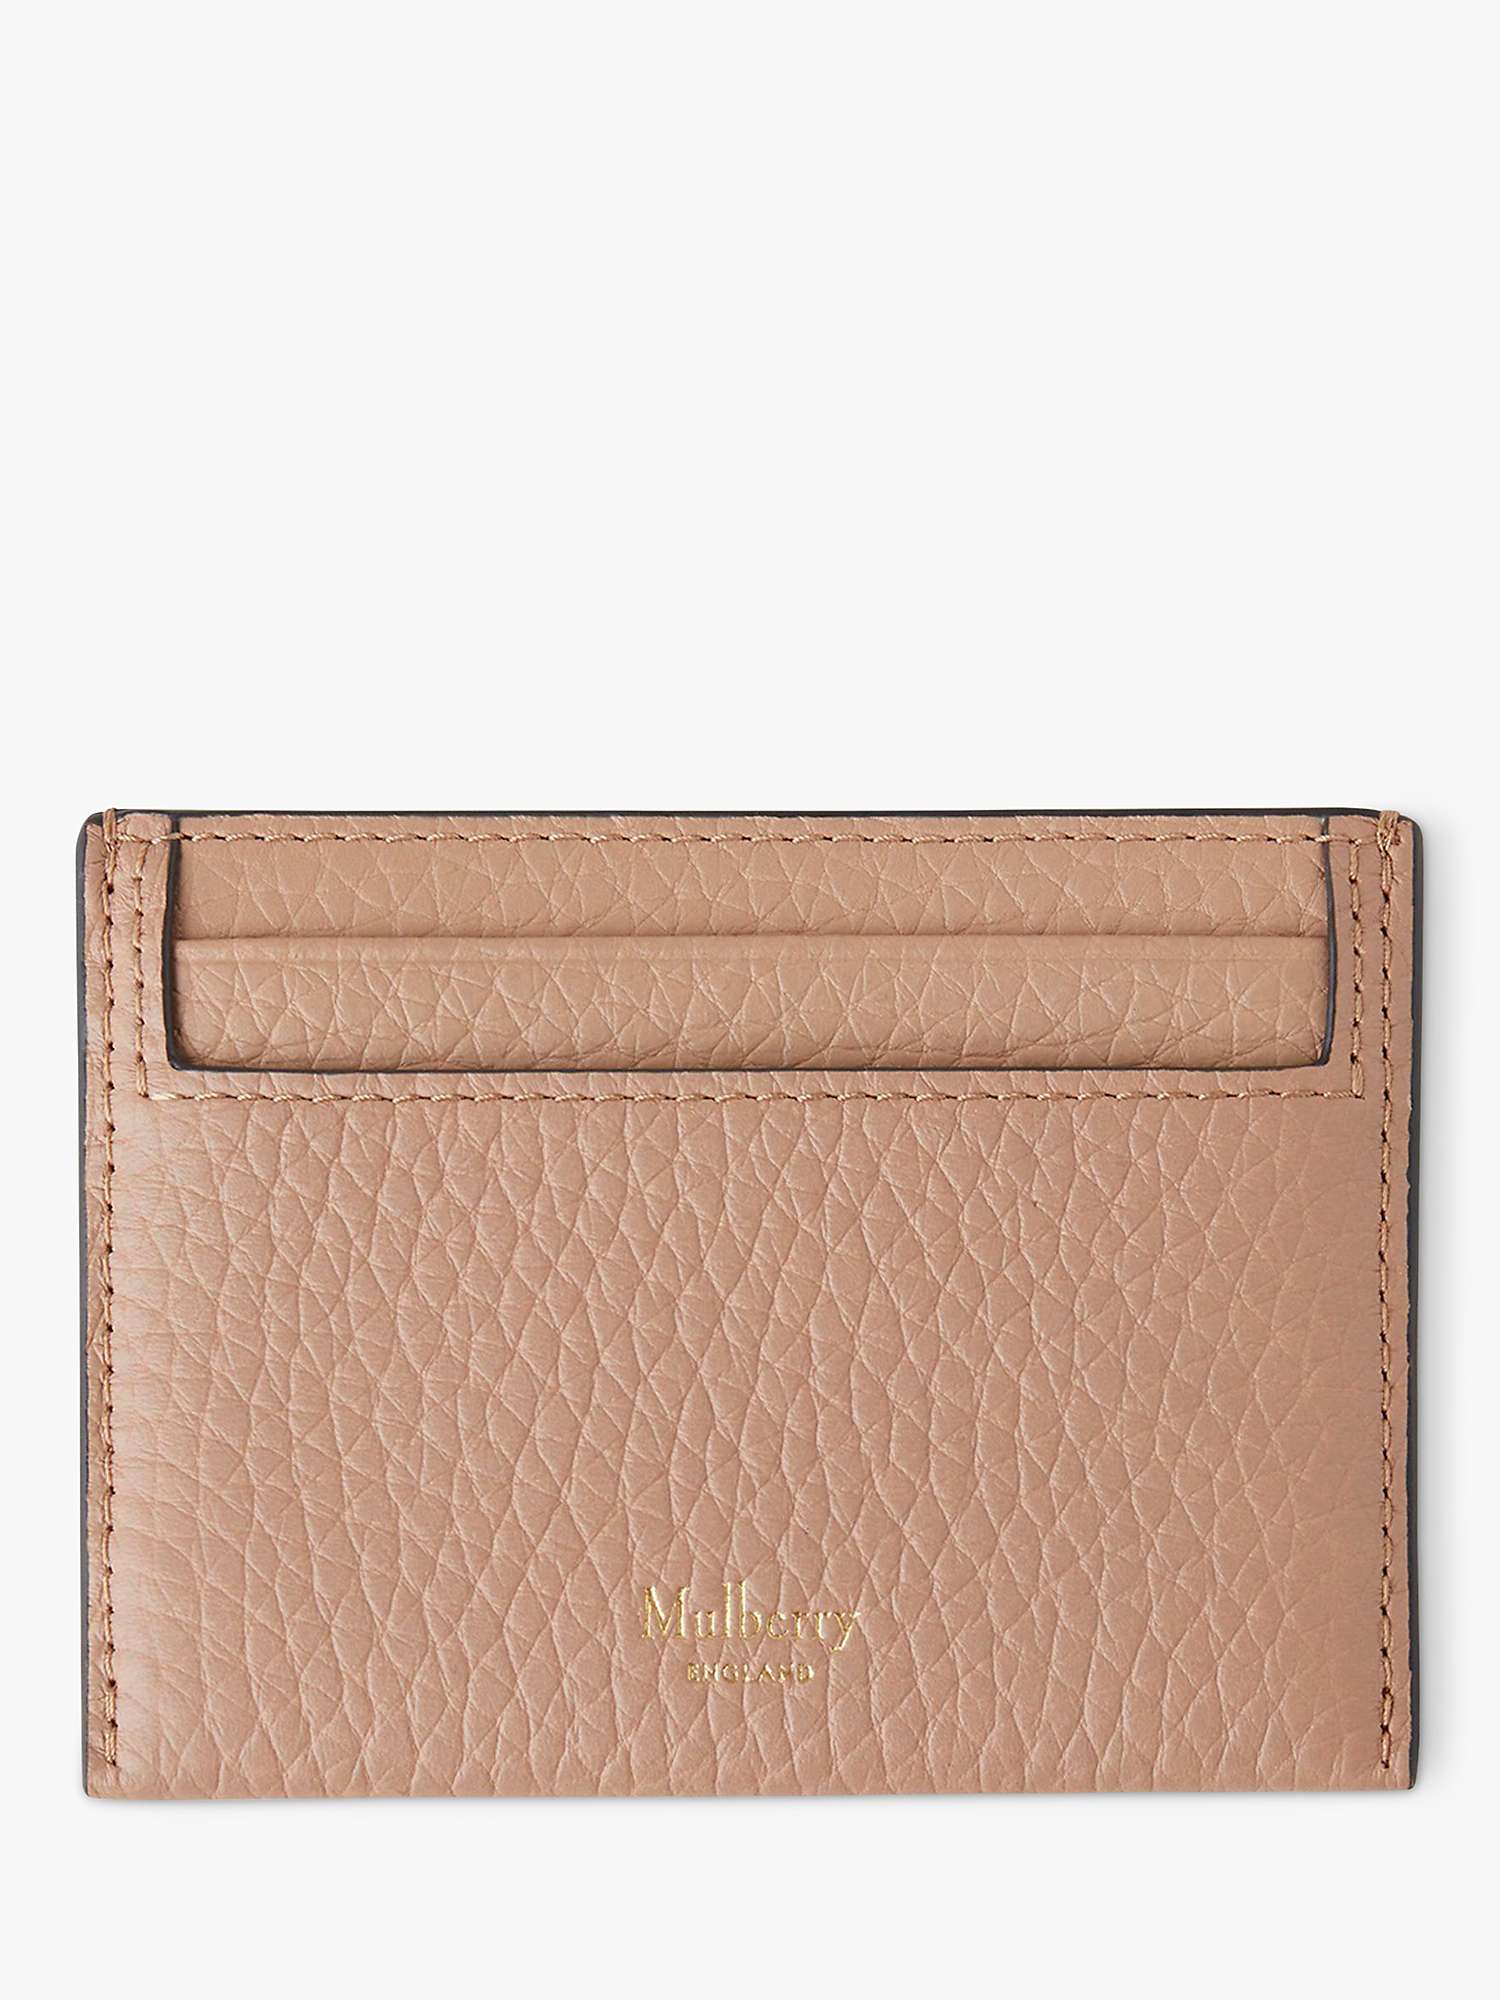 Buy Mulberry Heavy Grain Leather Credit Card Slip, Light Salmon Online at johnlewis.com